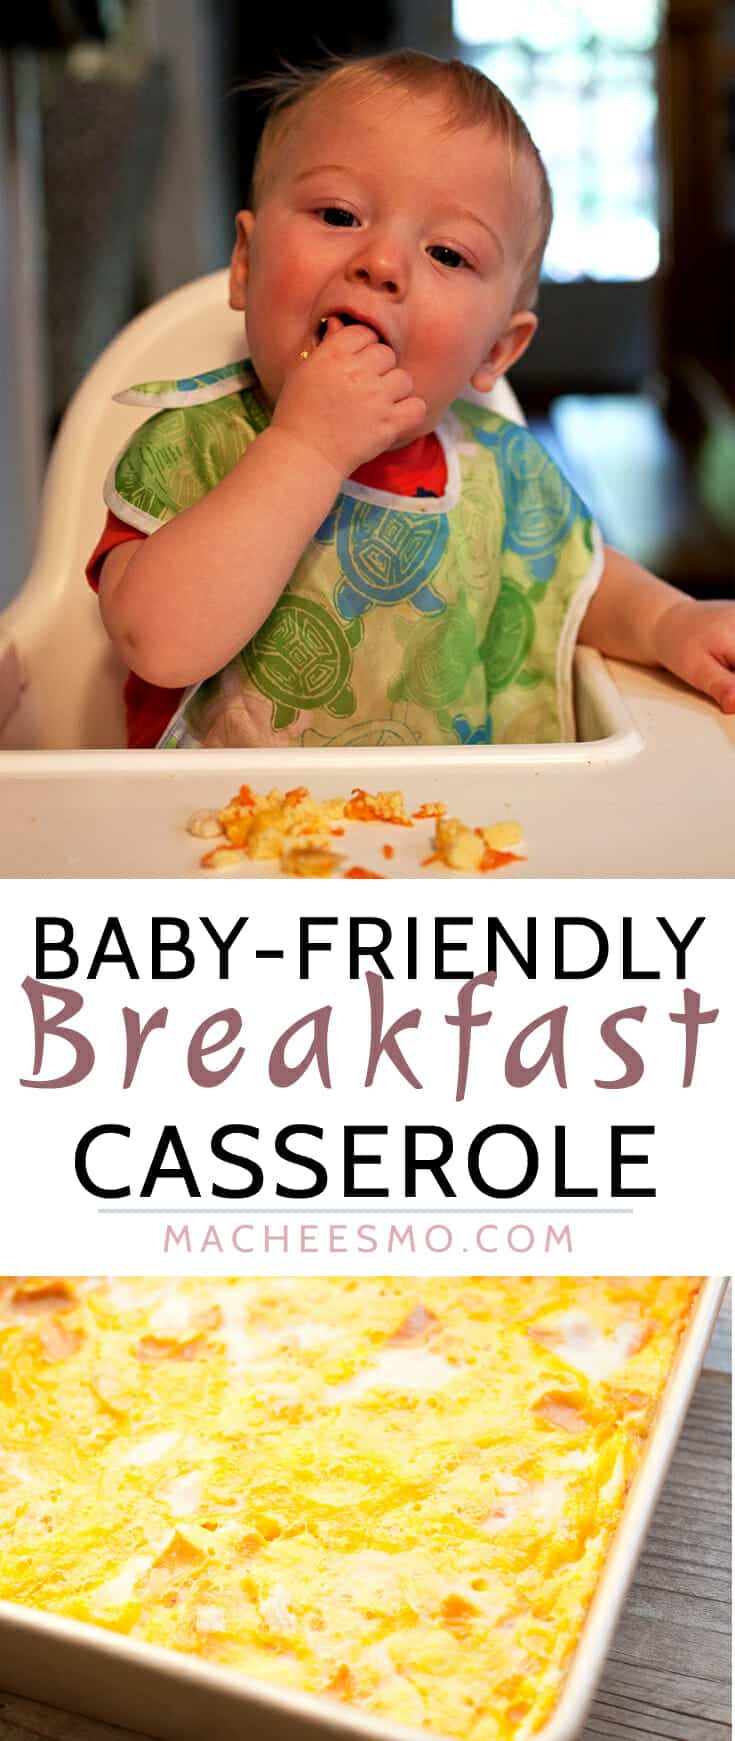 Baby-Friendly Breakfast Casserole: Feeding a toddler in the morning can be tricky. This simple shredded vegetable casserole is perfect for little ones. It's easy to heat up and they can pick it up on their own! Baby approved! | macheesmo.com